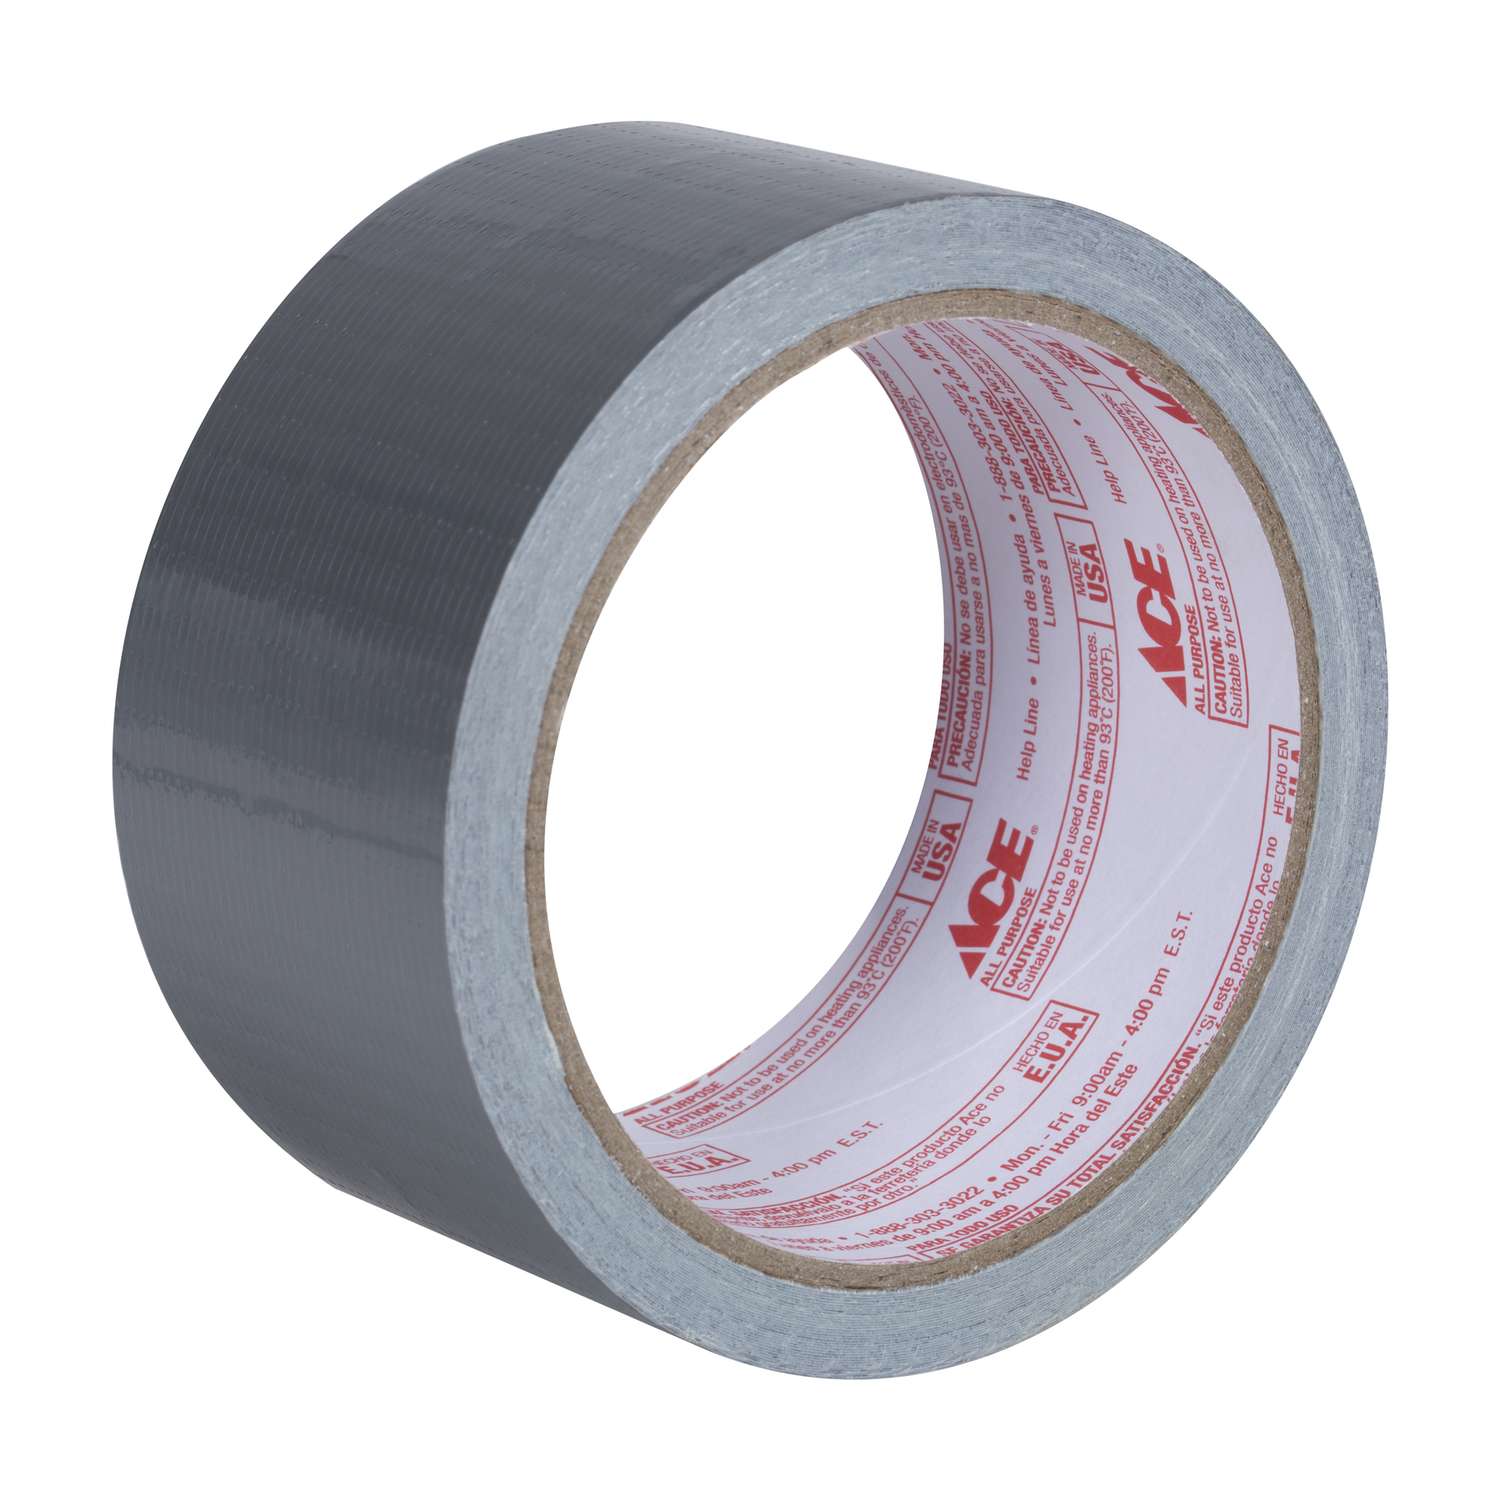 Duct Tape Roll (60 yds.) - Tire Supply Network